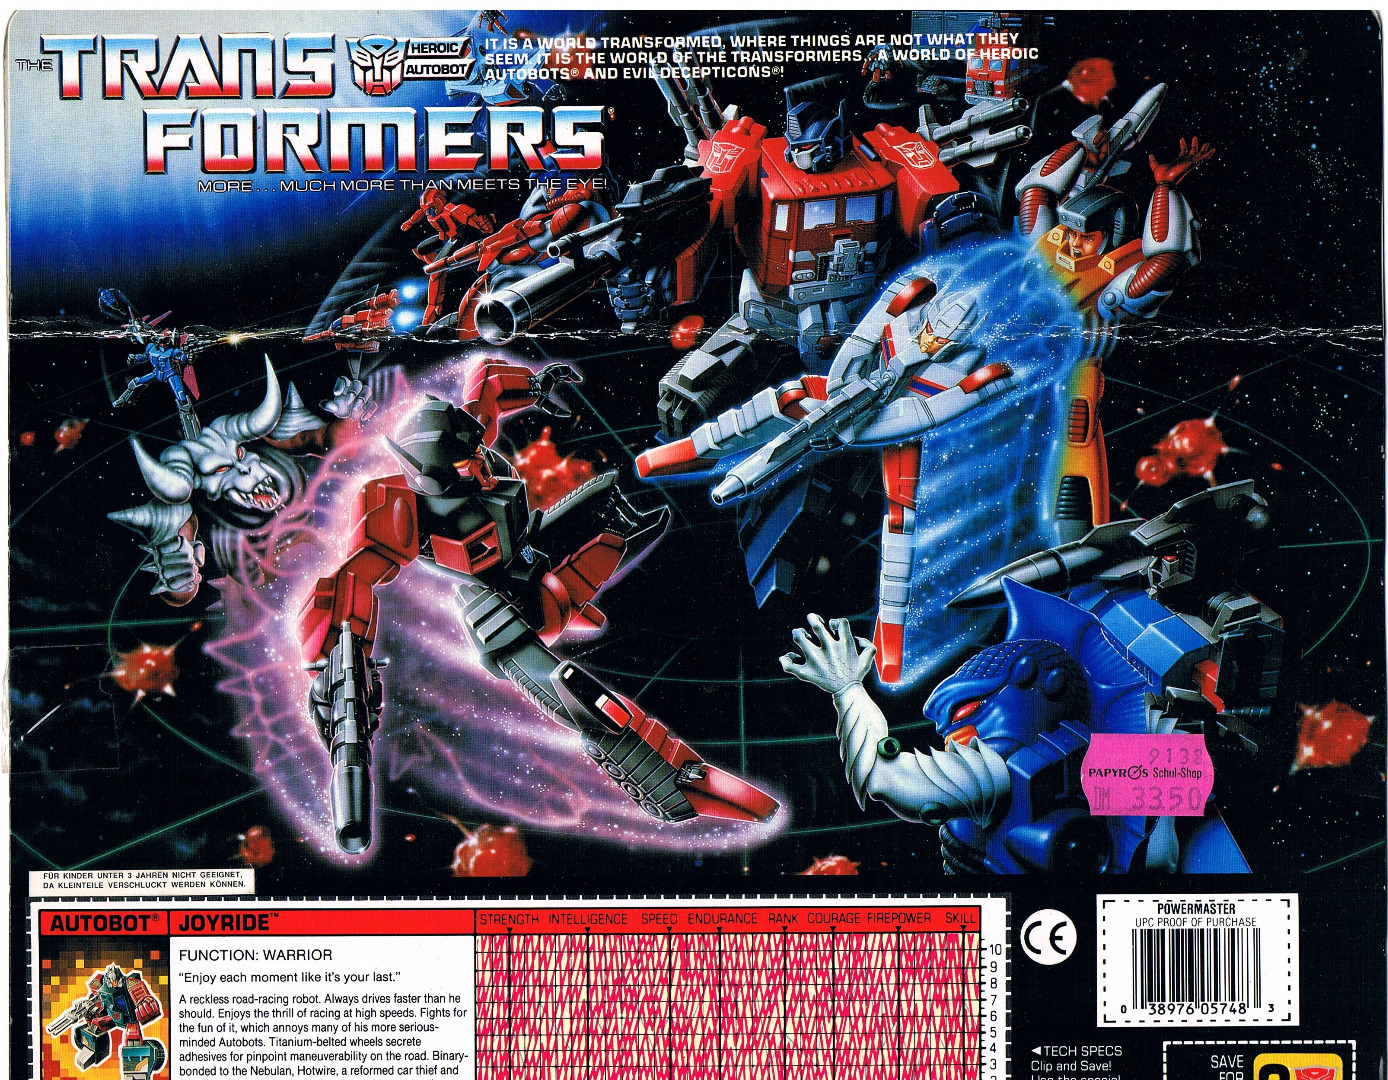 Info page 80s/90s Toys - 32 pictures of packaging & advertising